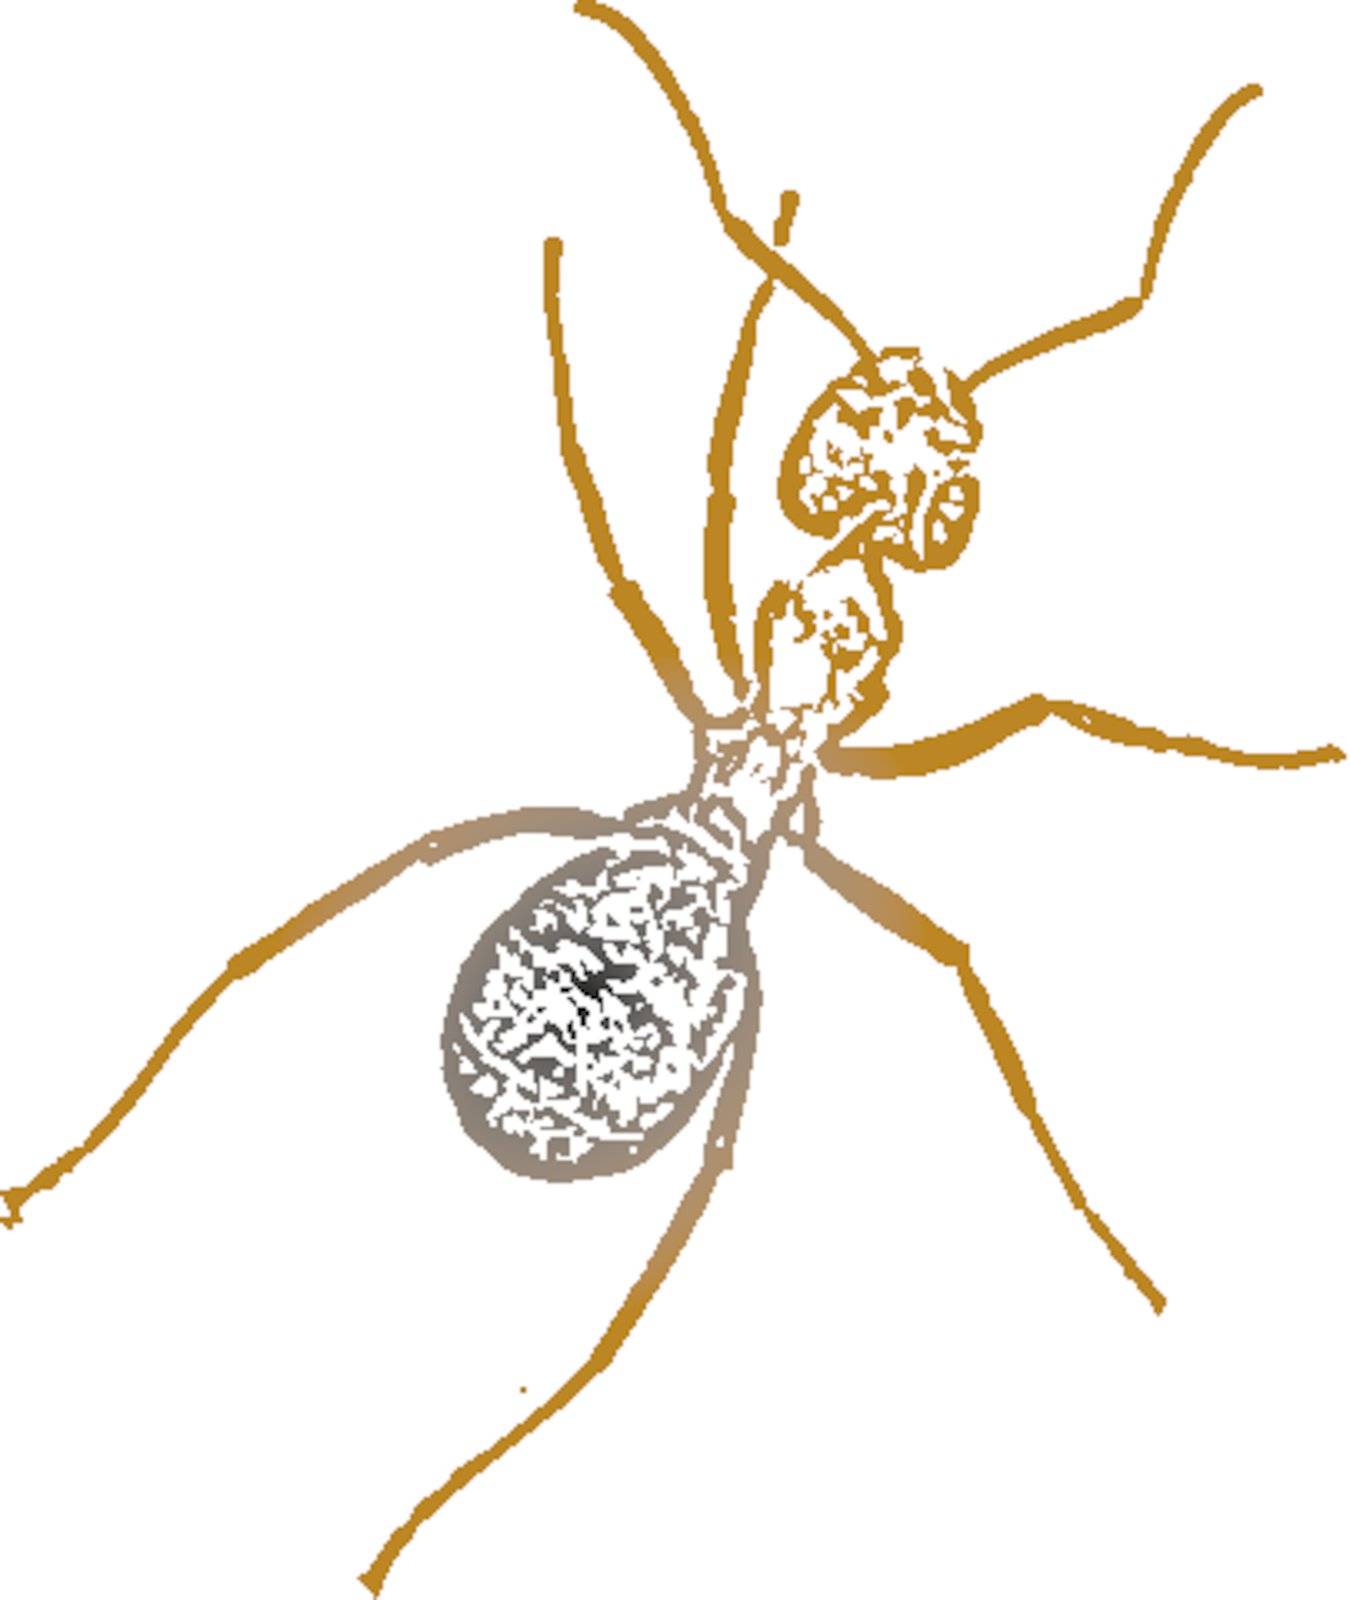 Vector image of a ant by Larser